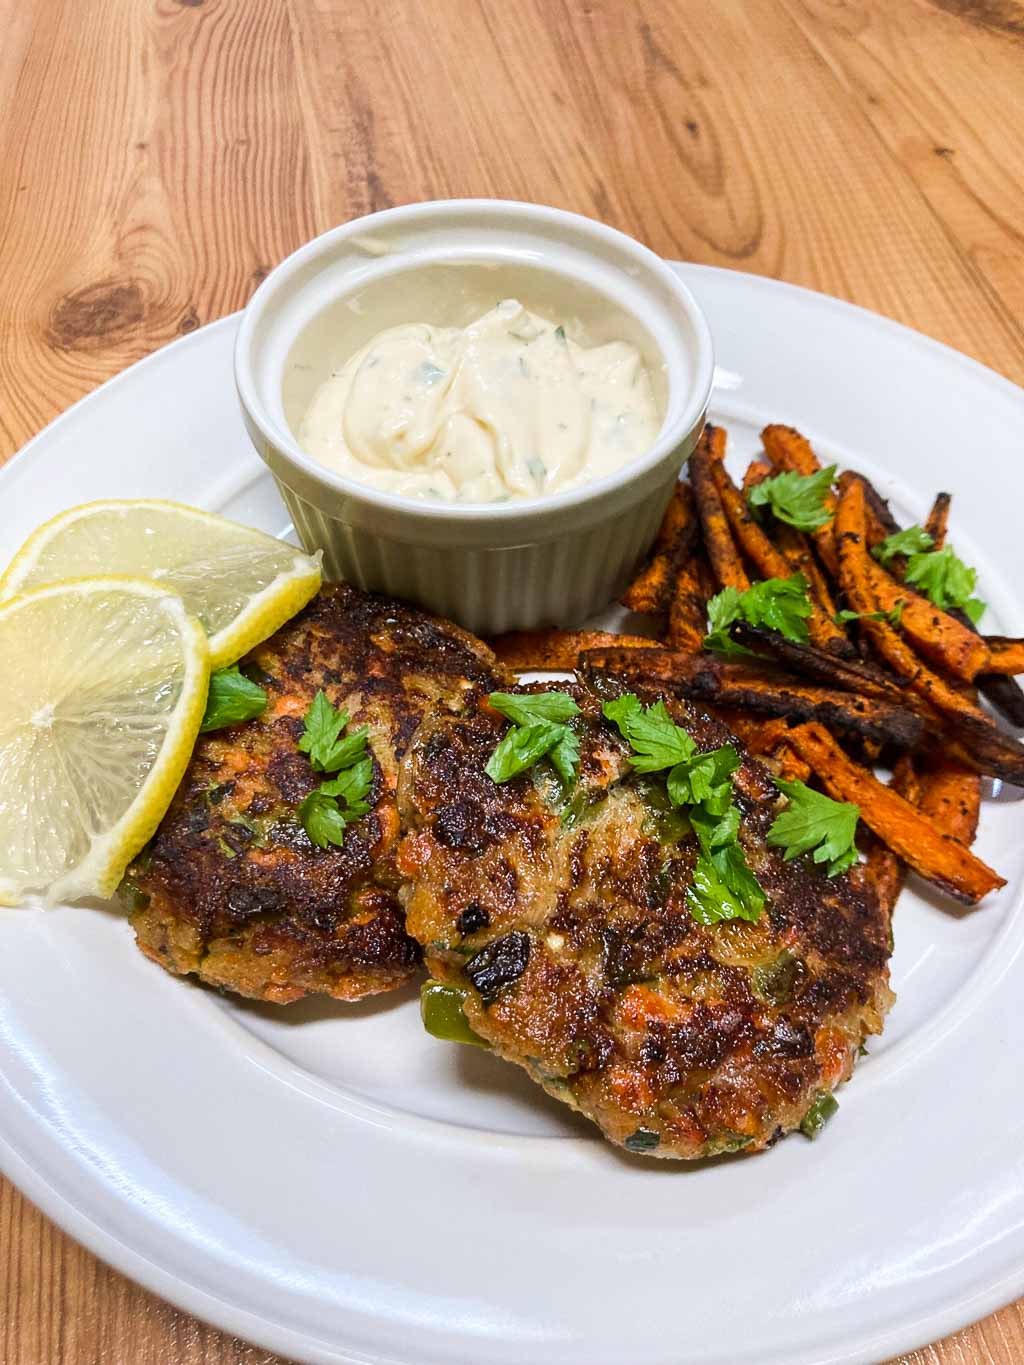 Salmon cakes with garlic aioli and carrot fries